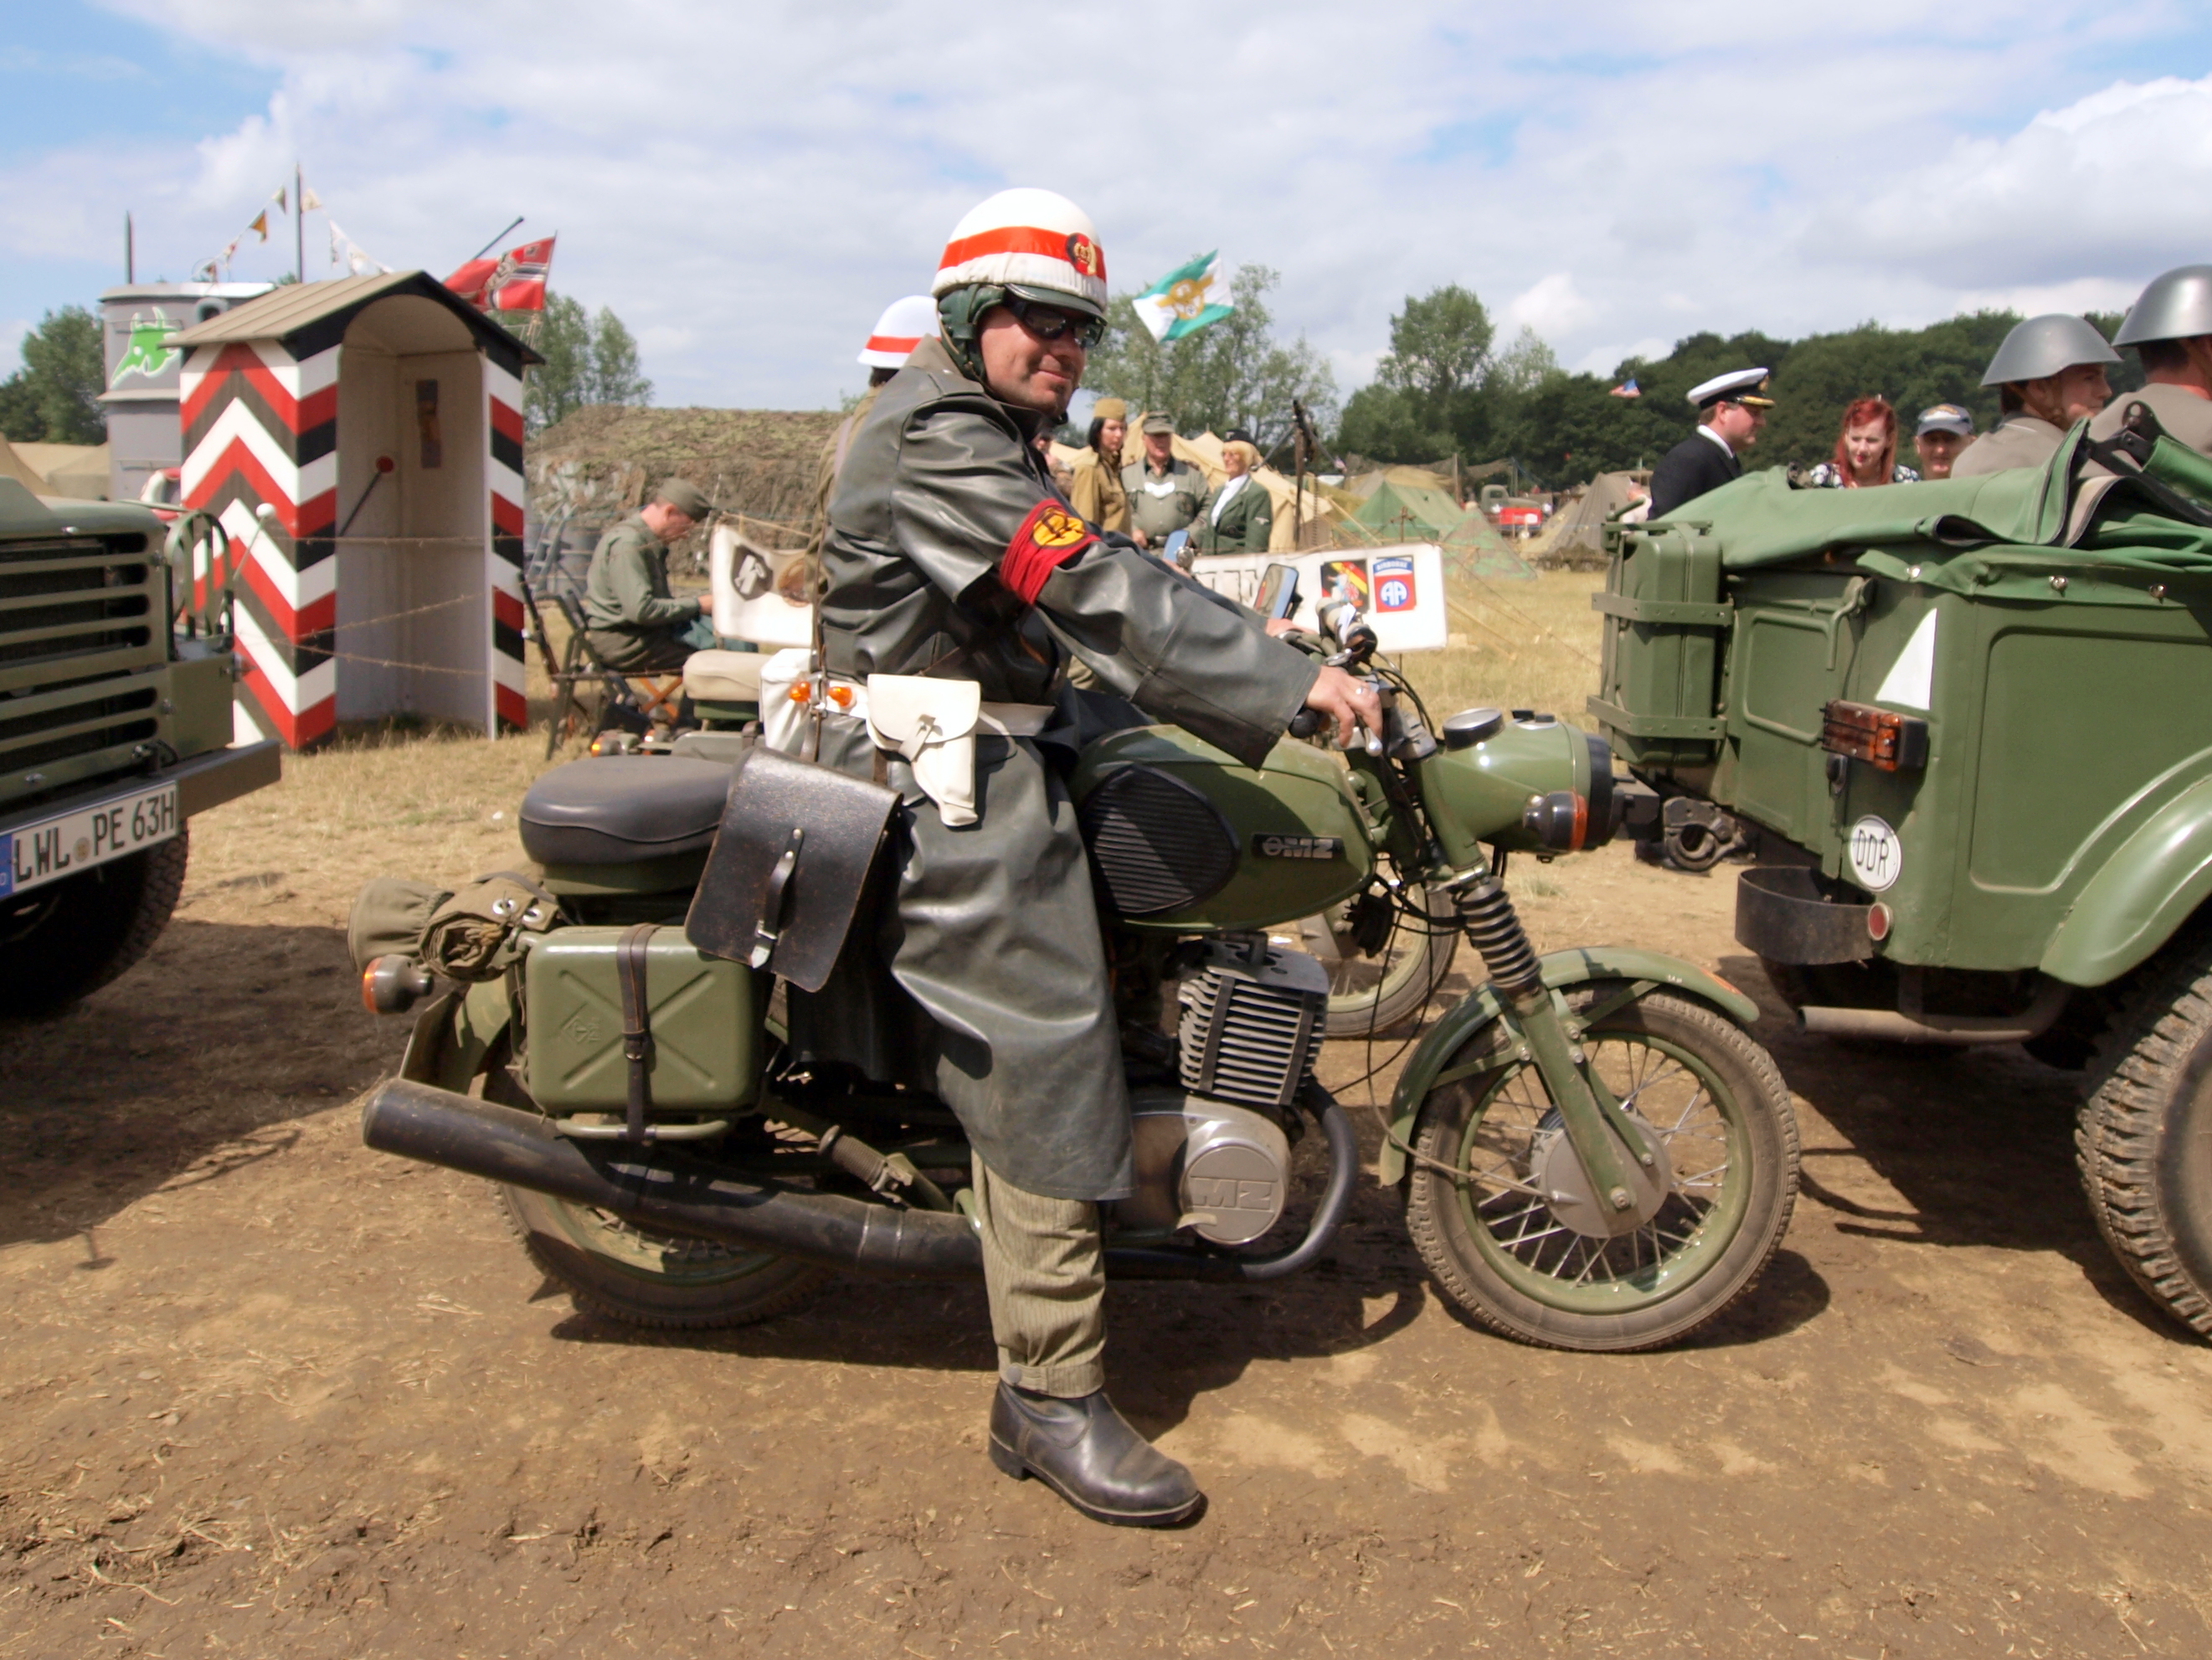 File:MZ military motorcycles War & Peace show 2010 pic2.JPG ...